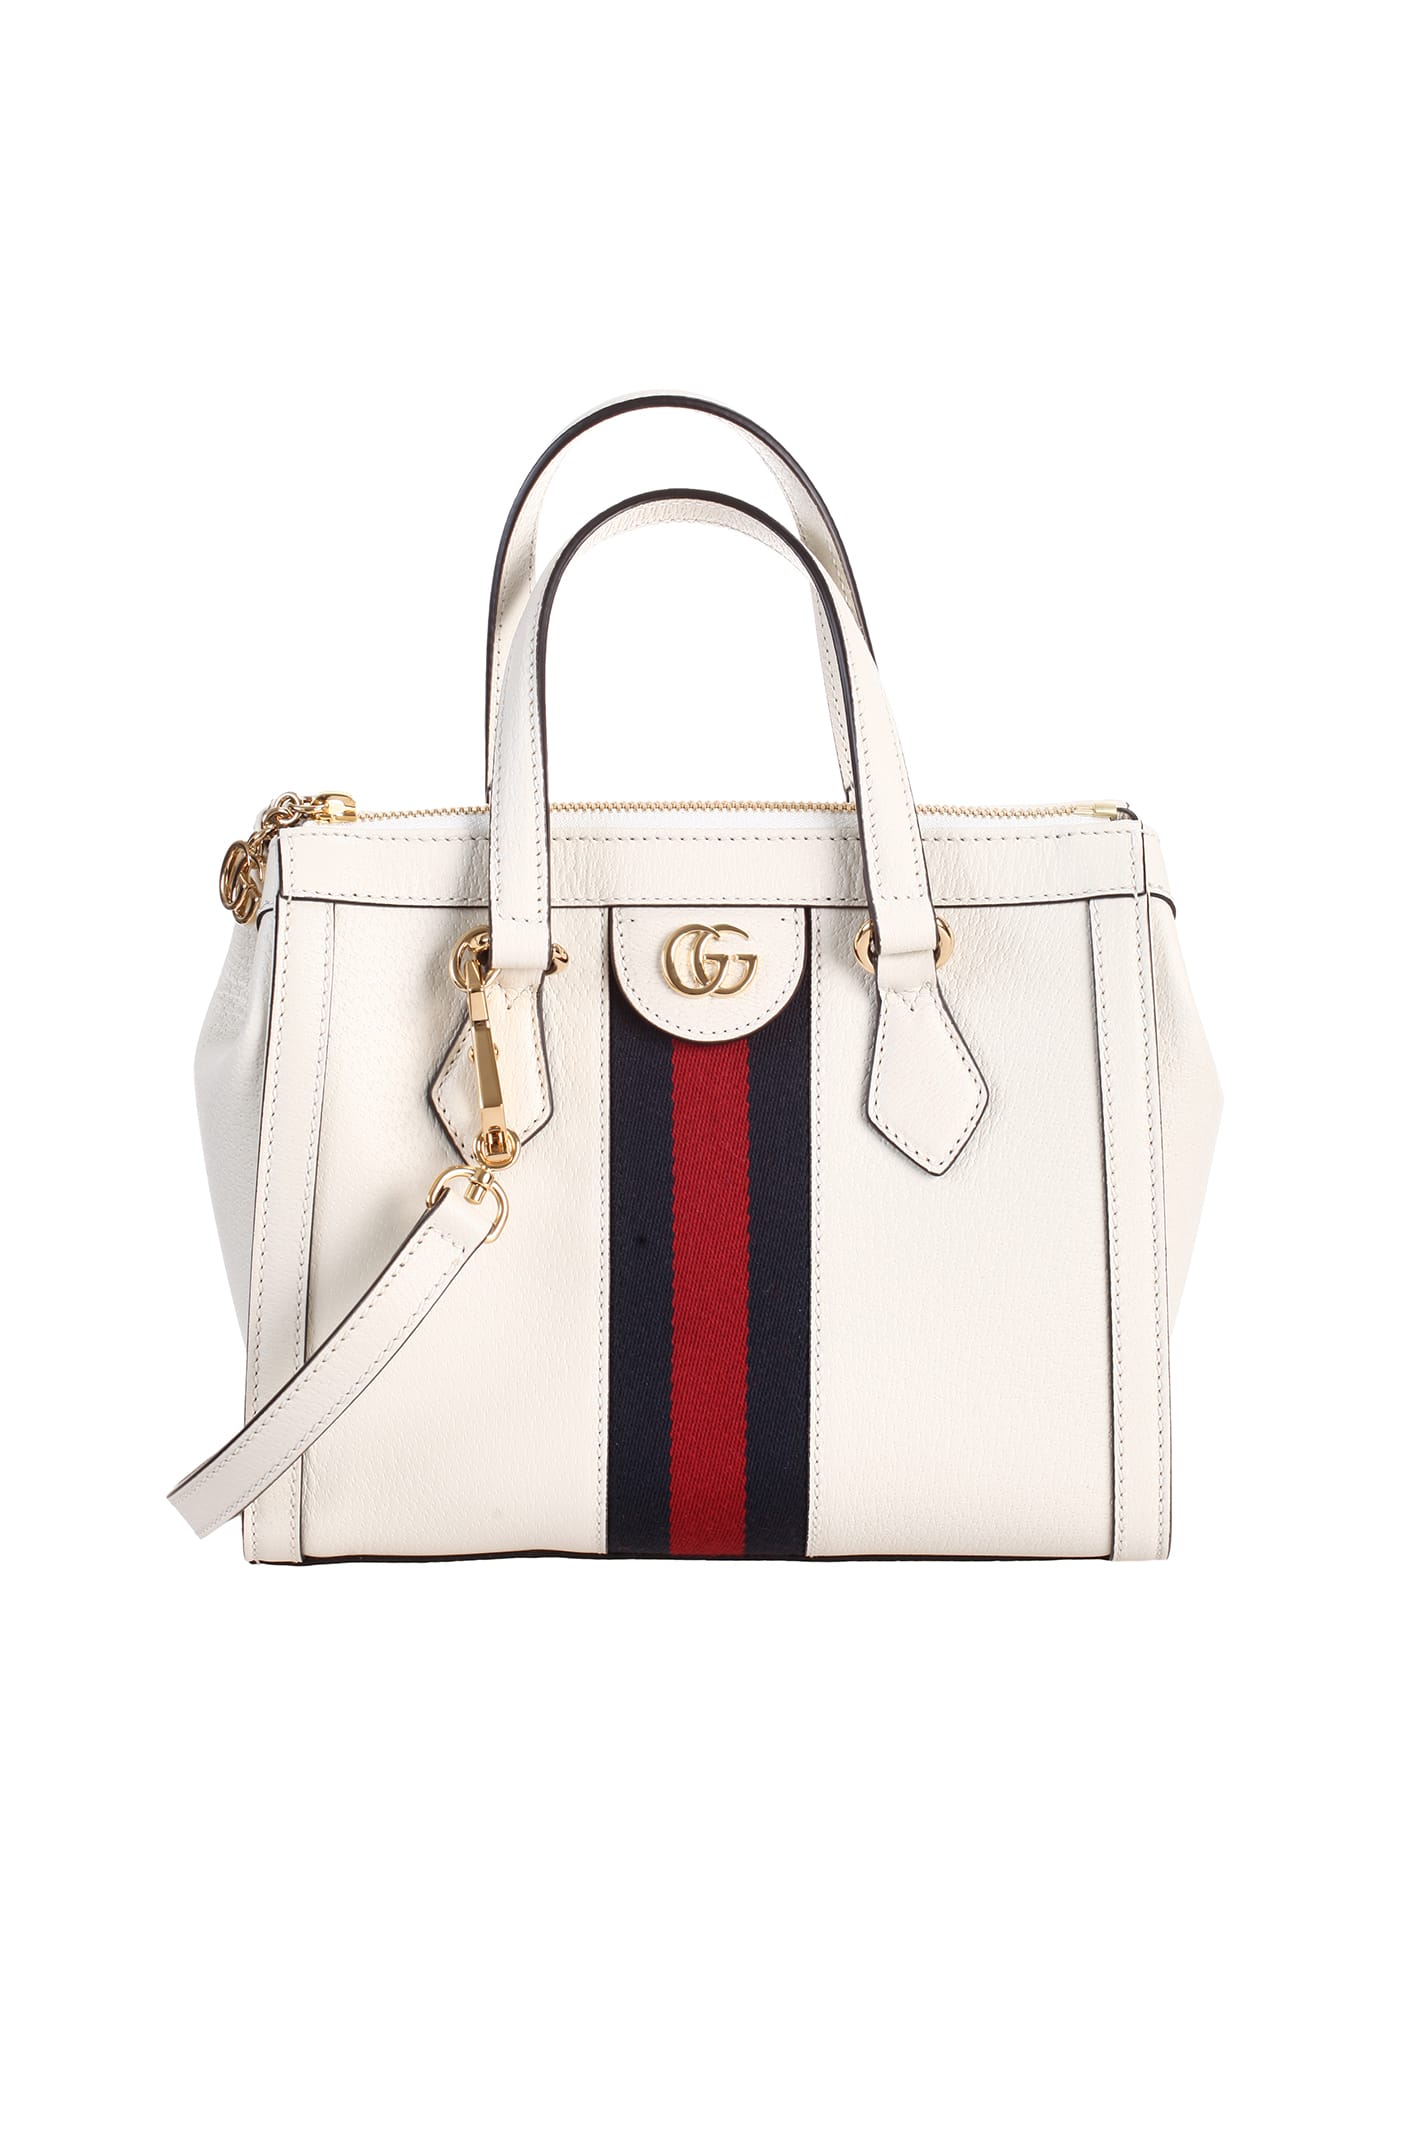 GUCCI OPHIDIA SHOPPING BAG,11210117